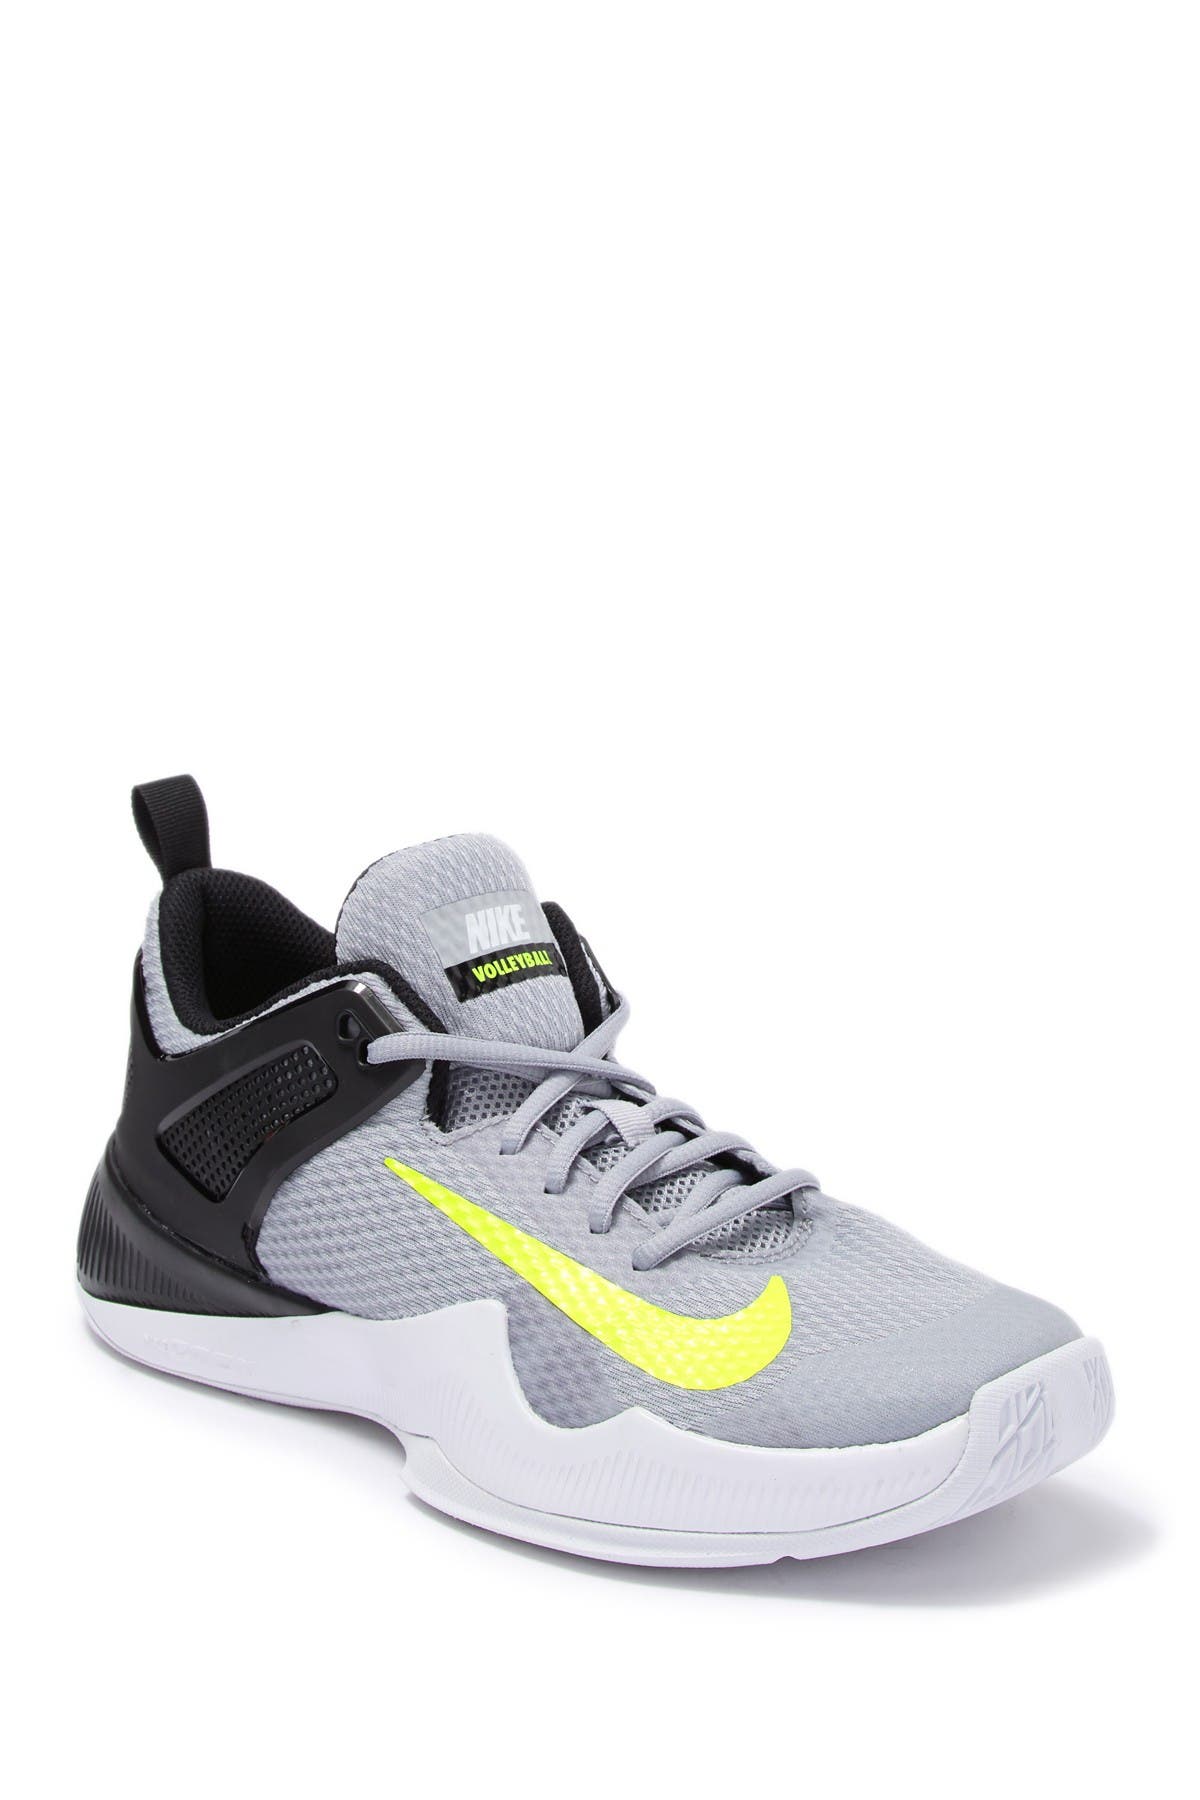 Nike | Air Zoom HyperAttack Volleyball 